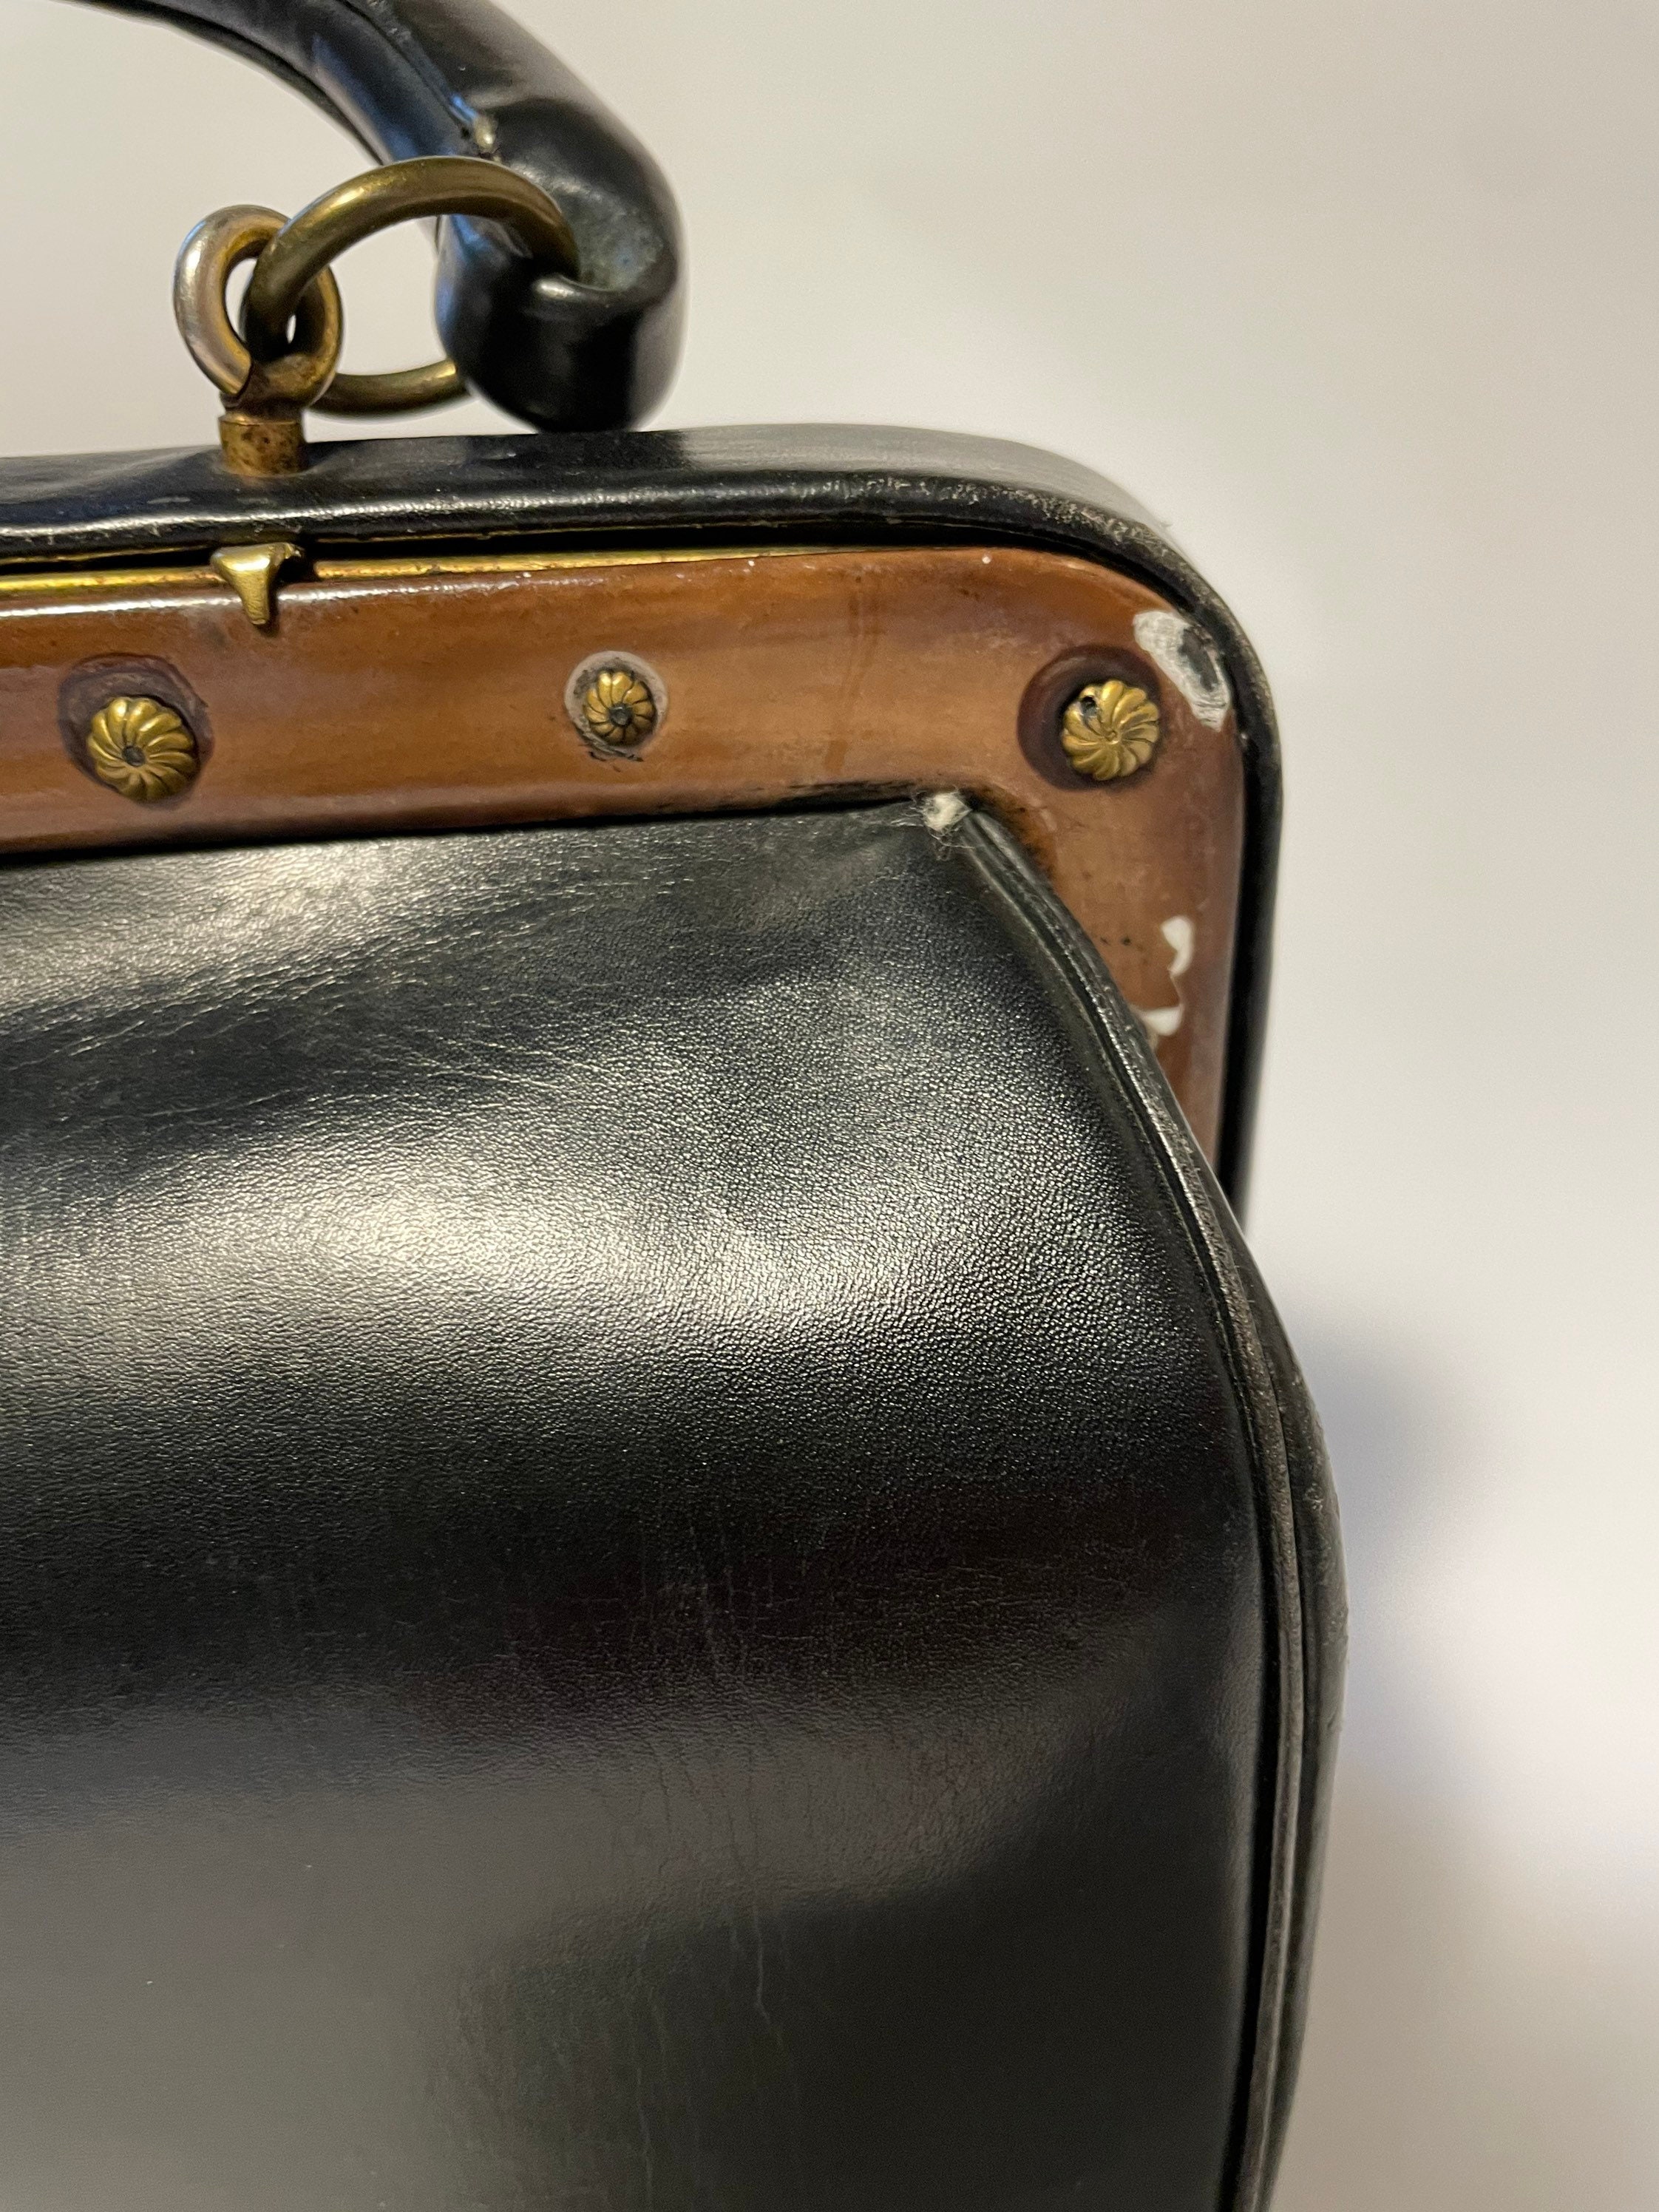 7 images Roberta di Camerino Black Leather Doctor Bag - MRS Couture